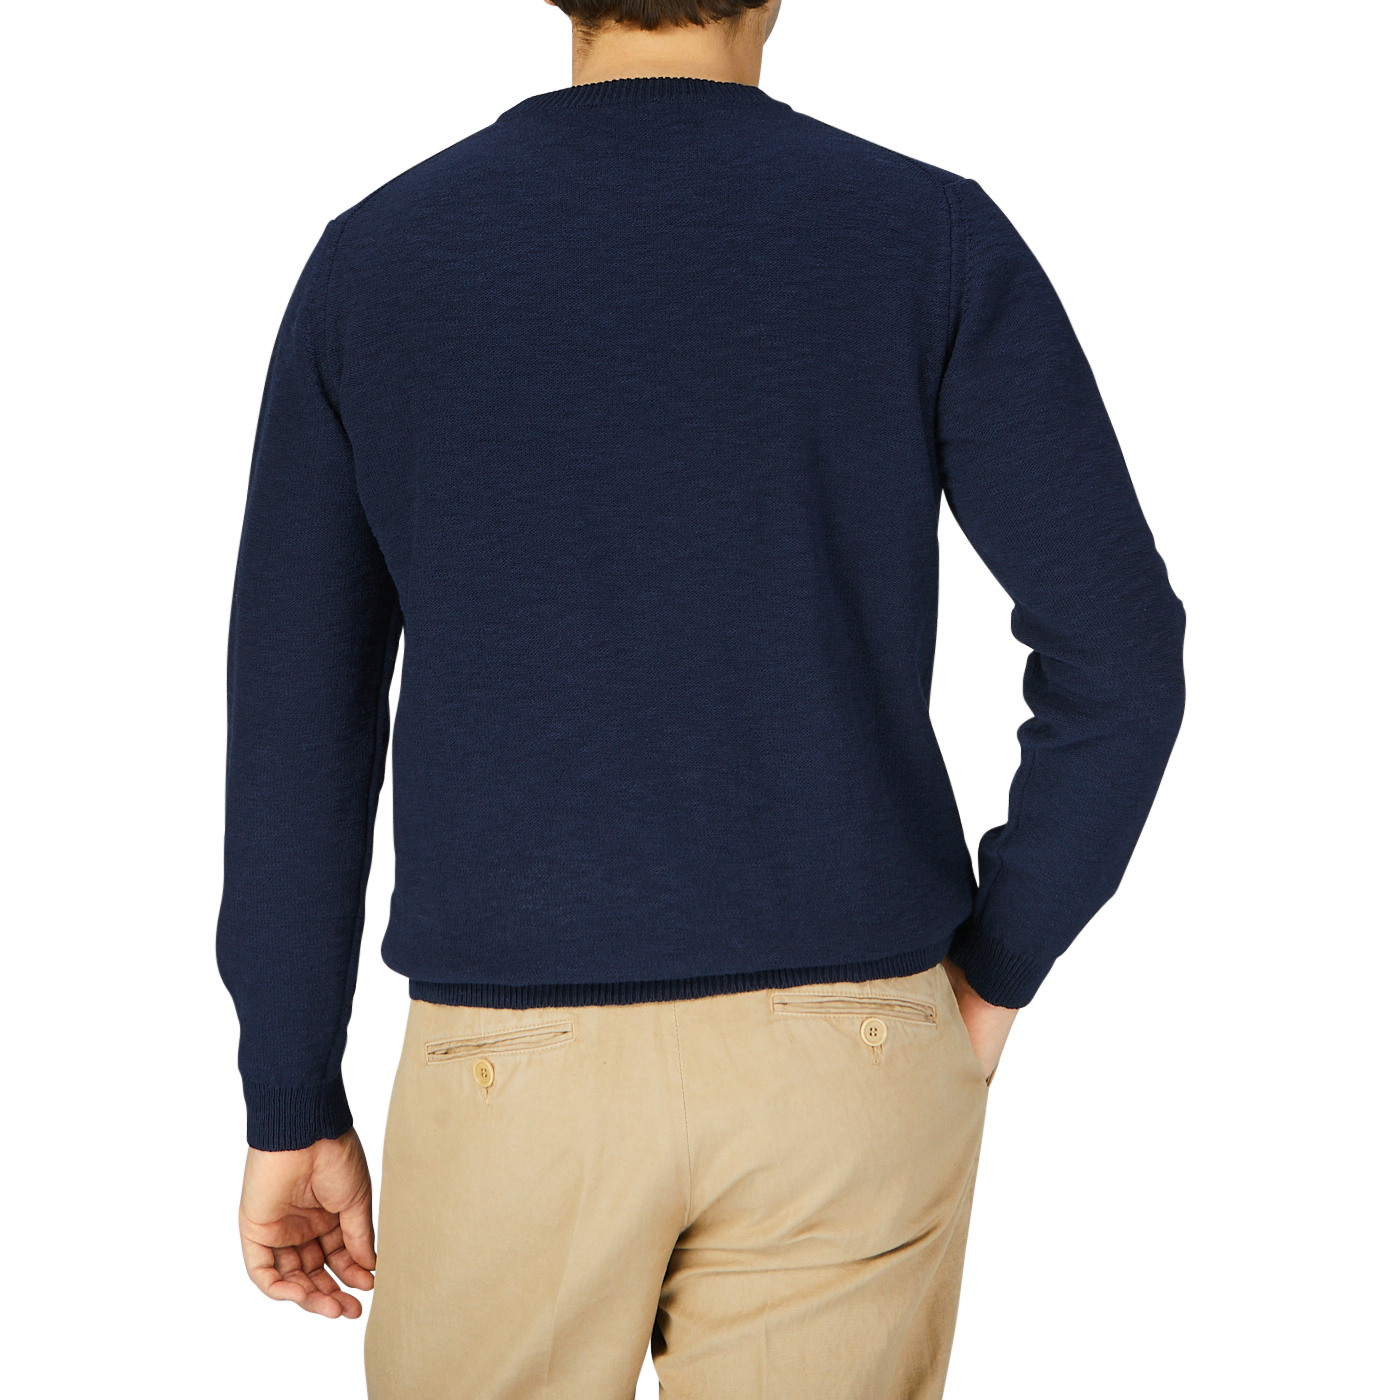 The back view of a man wearing a Maurizio Baldassari Navy Cotton Mouline Crew Neck Sweater and khaki pants.